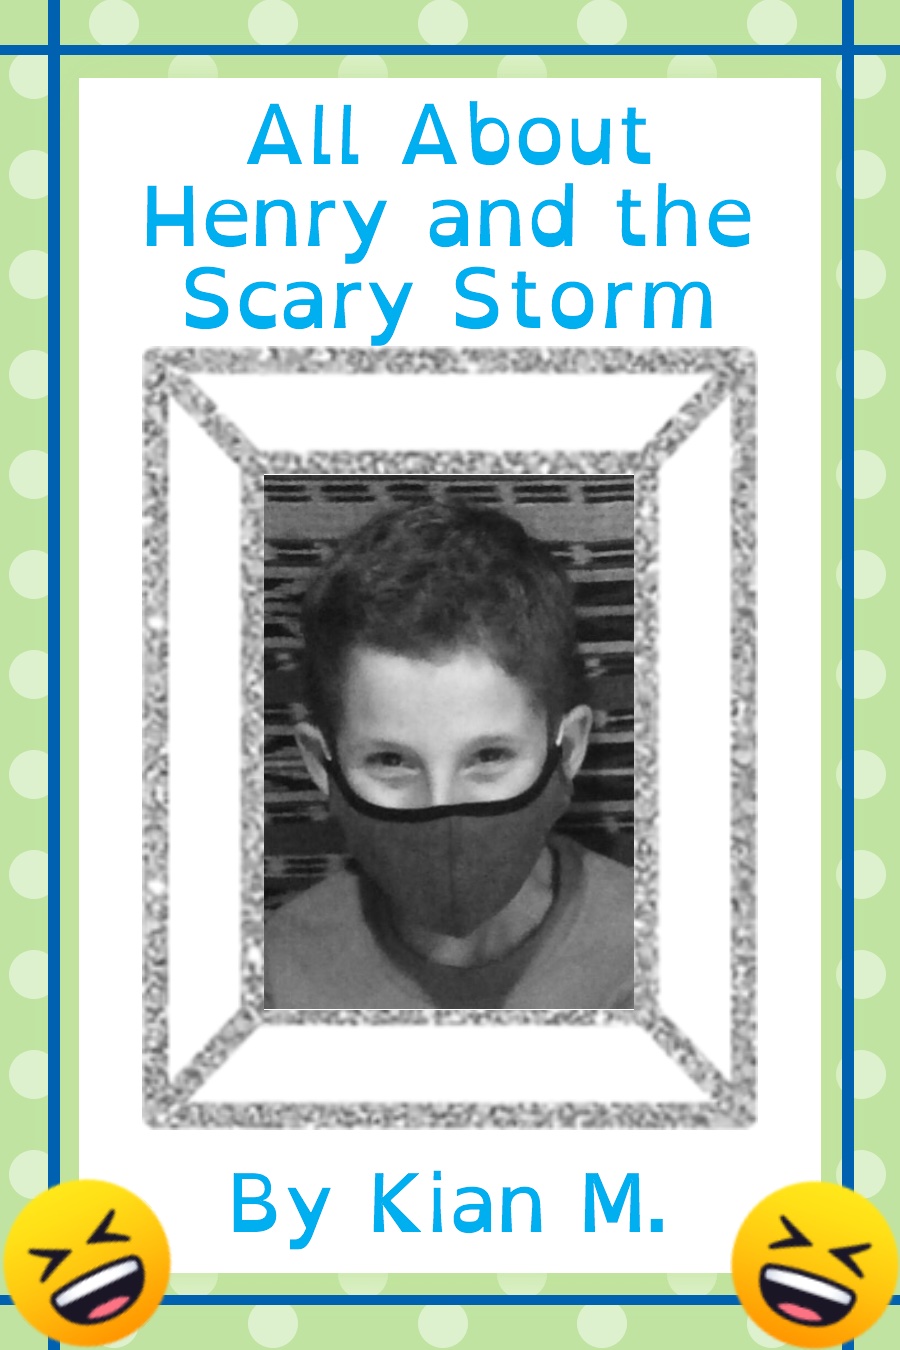 All About Henry and the Scary Storm by Kian M